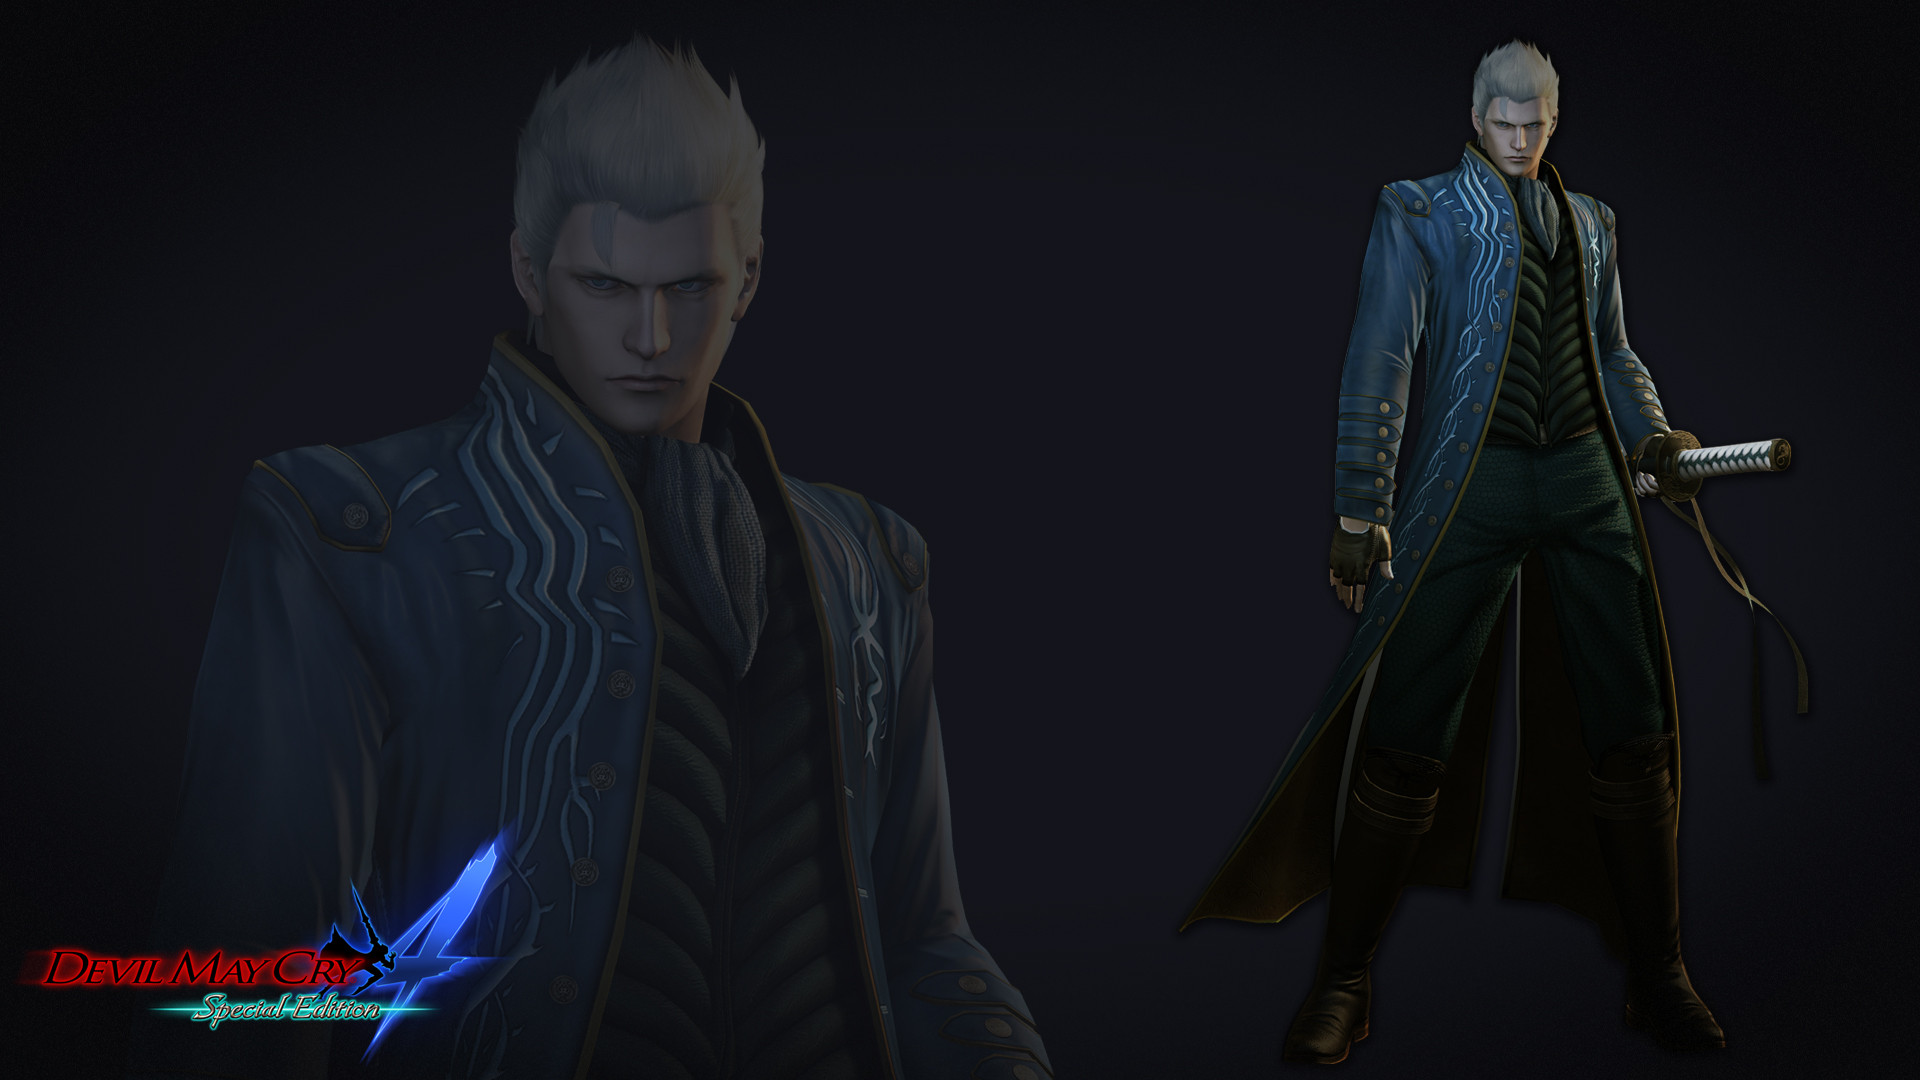 Handy-Wallpaper Devil May Cry, Computerspiele, Devil May Cry 4, Vergil (Devil May Cry) kostenlos herunterladen.